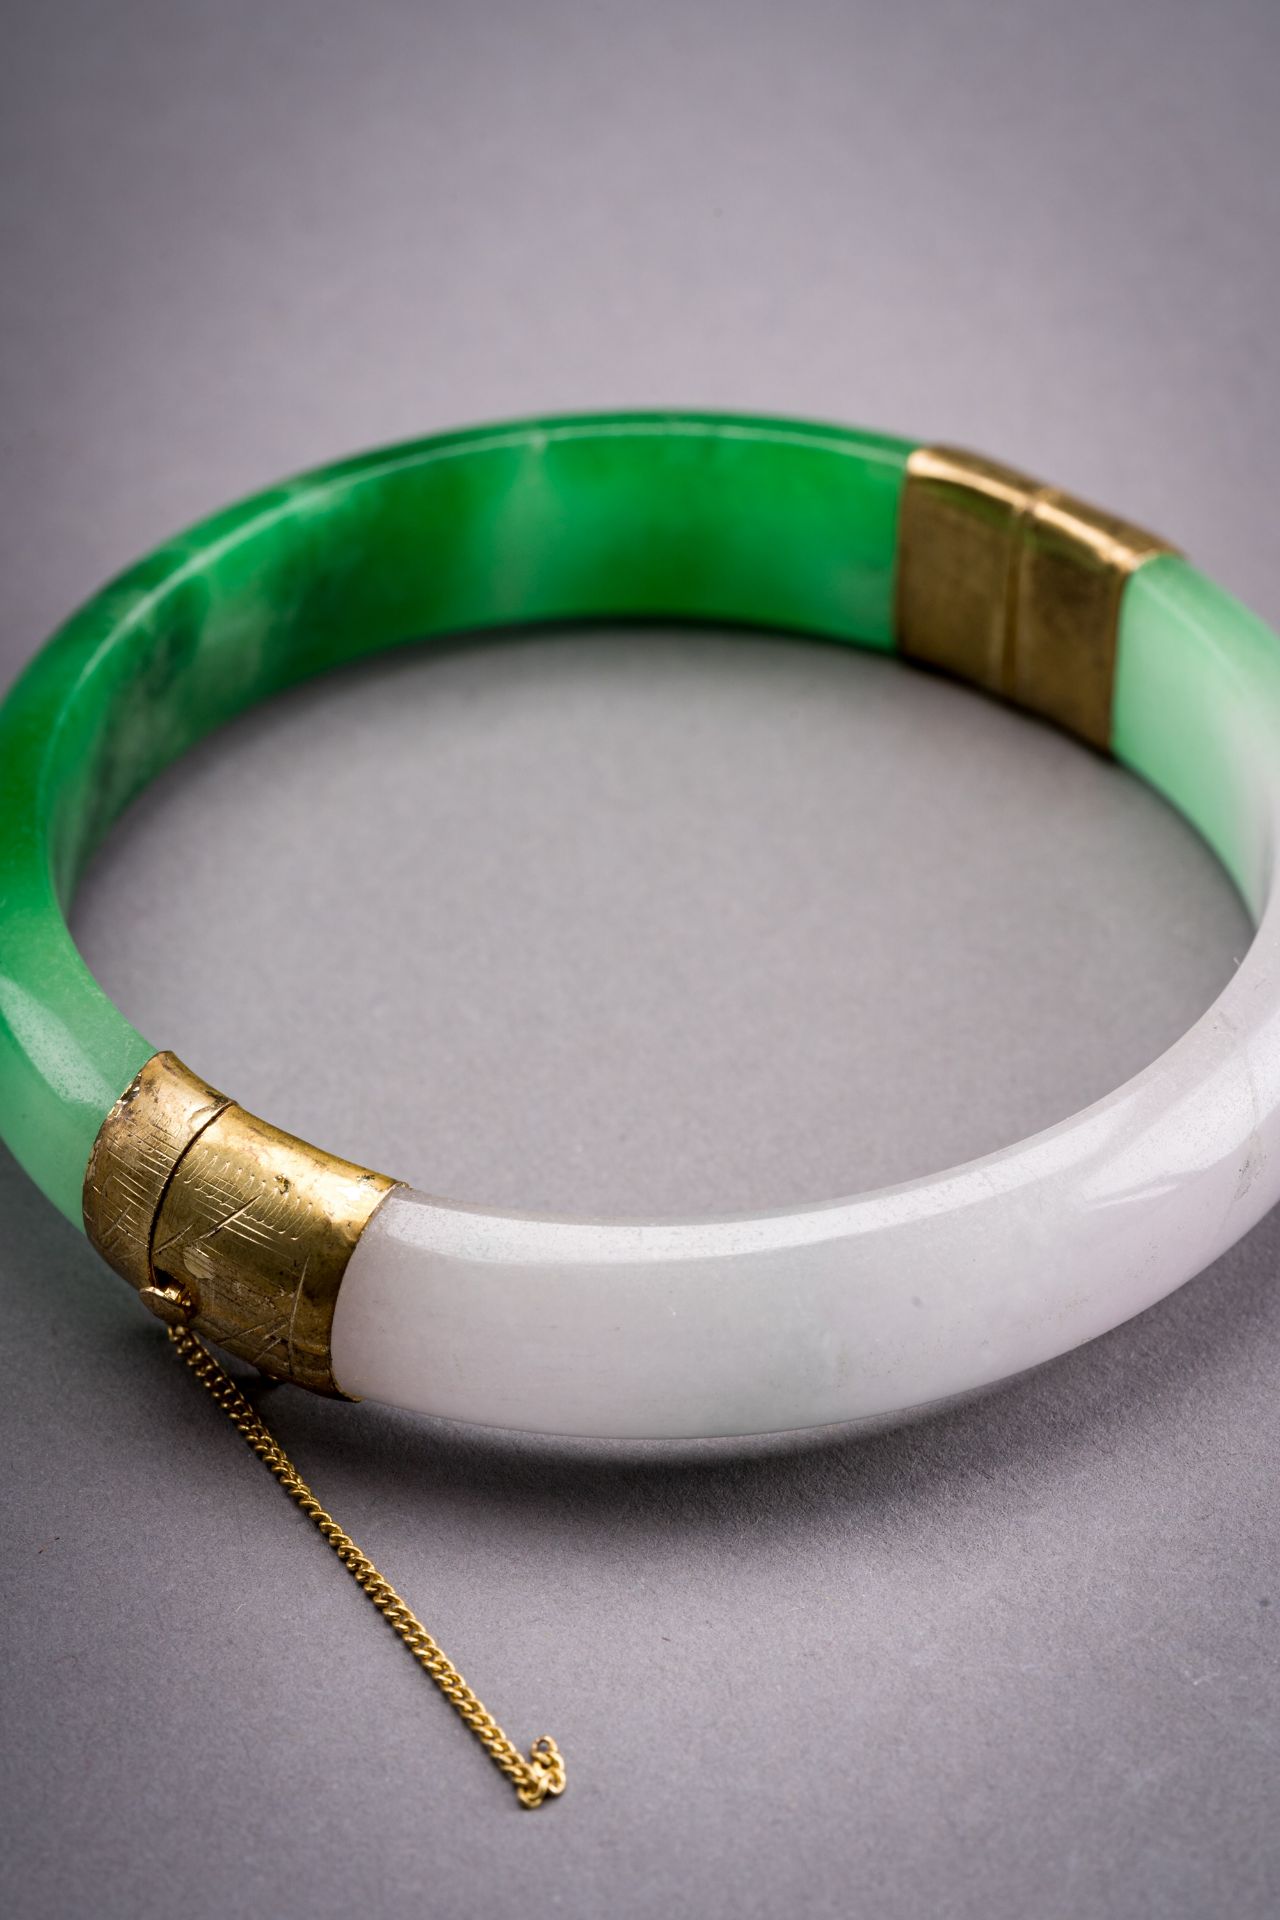 A PALE LAVENDER AND EMERALD GREEN JADEITE BANGLE - Image 4 of 7